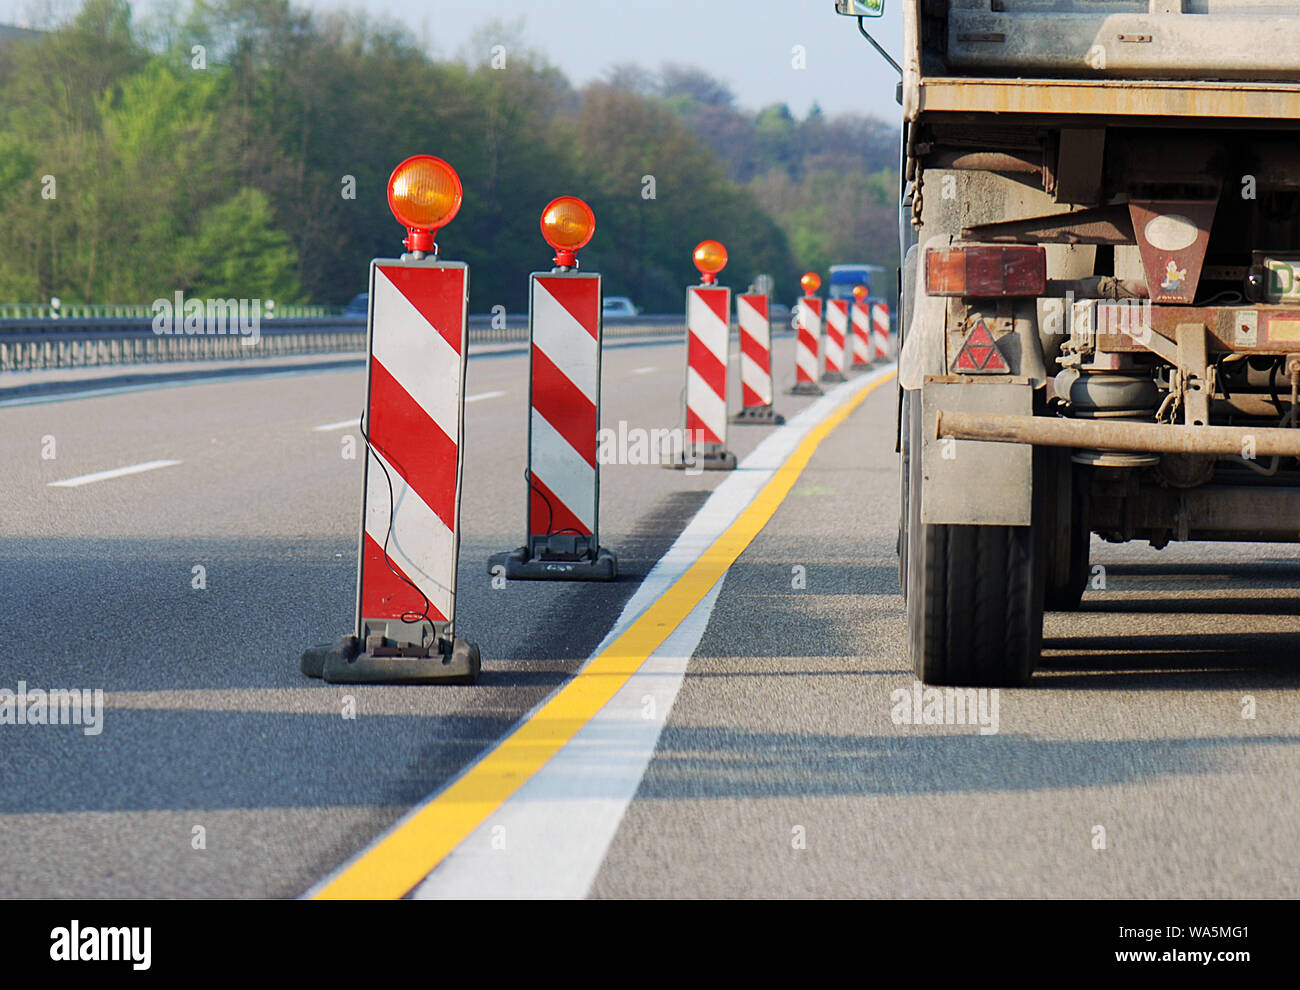 Dangerous situation with truck in roadwork lot on highway Stock Photo